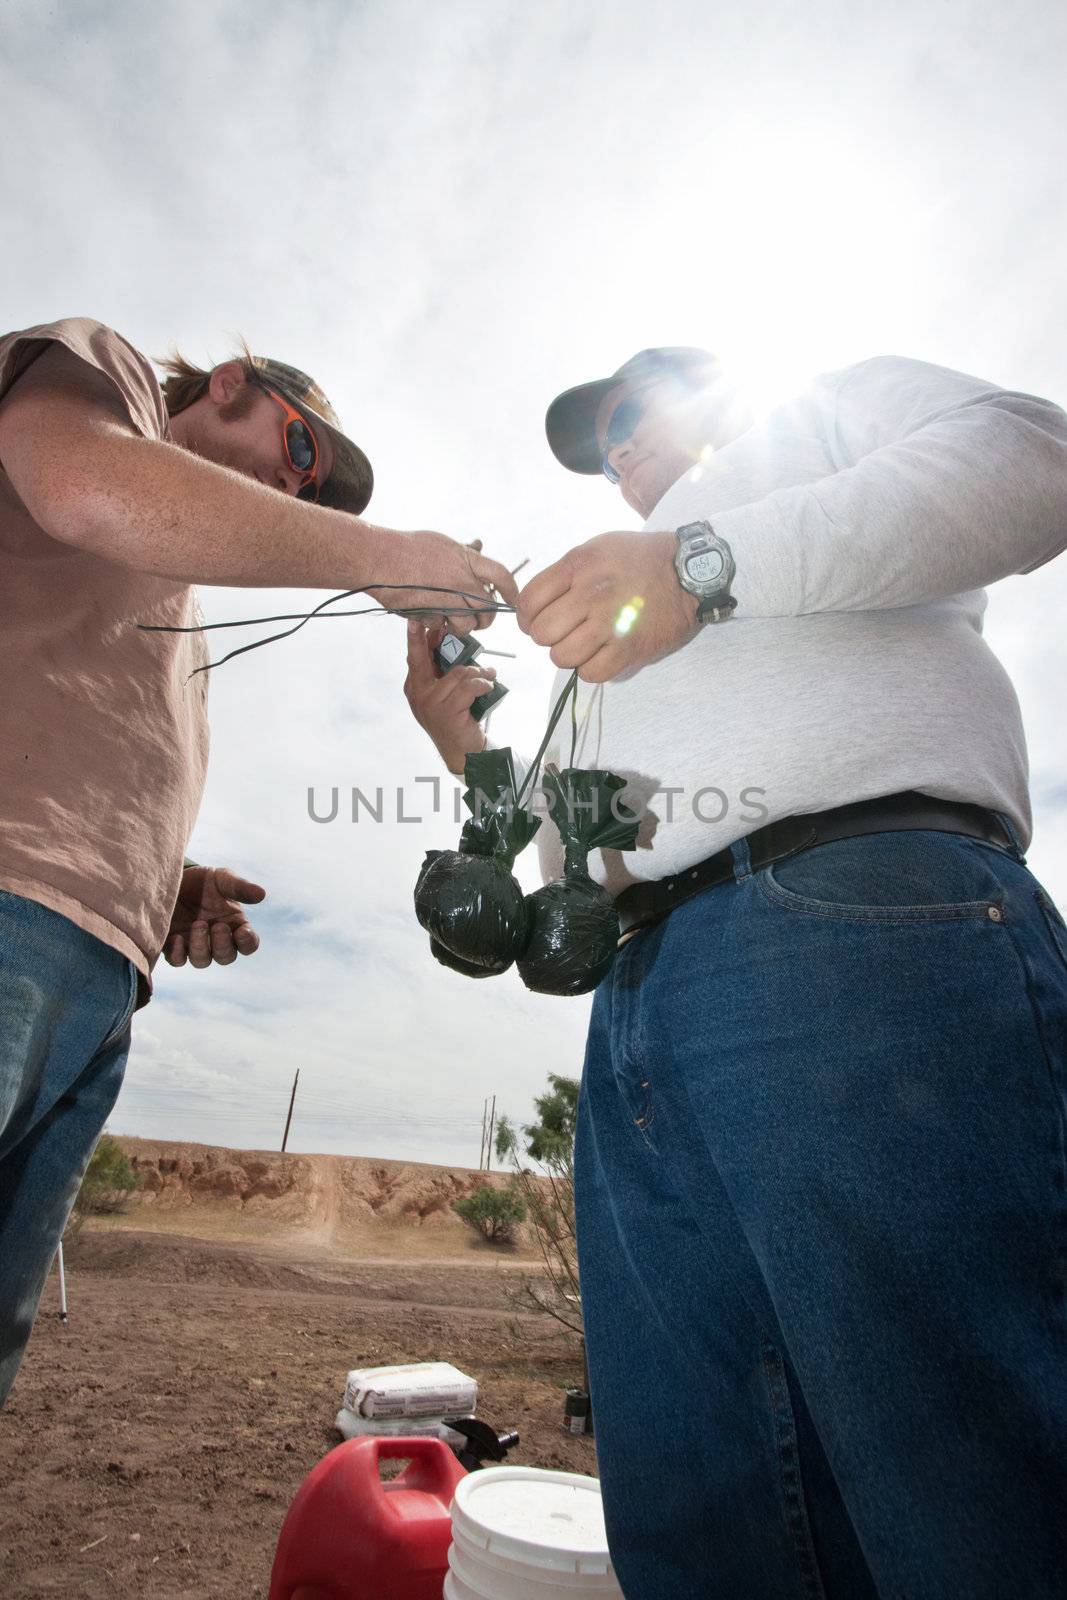 Special effects crew members tying bags of explosive powder